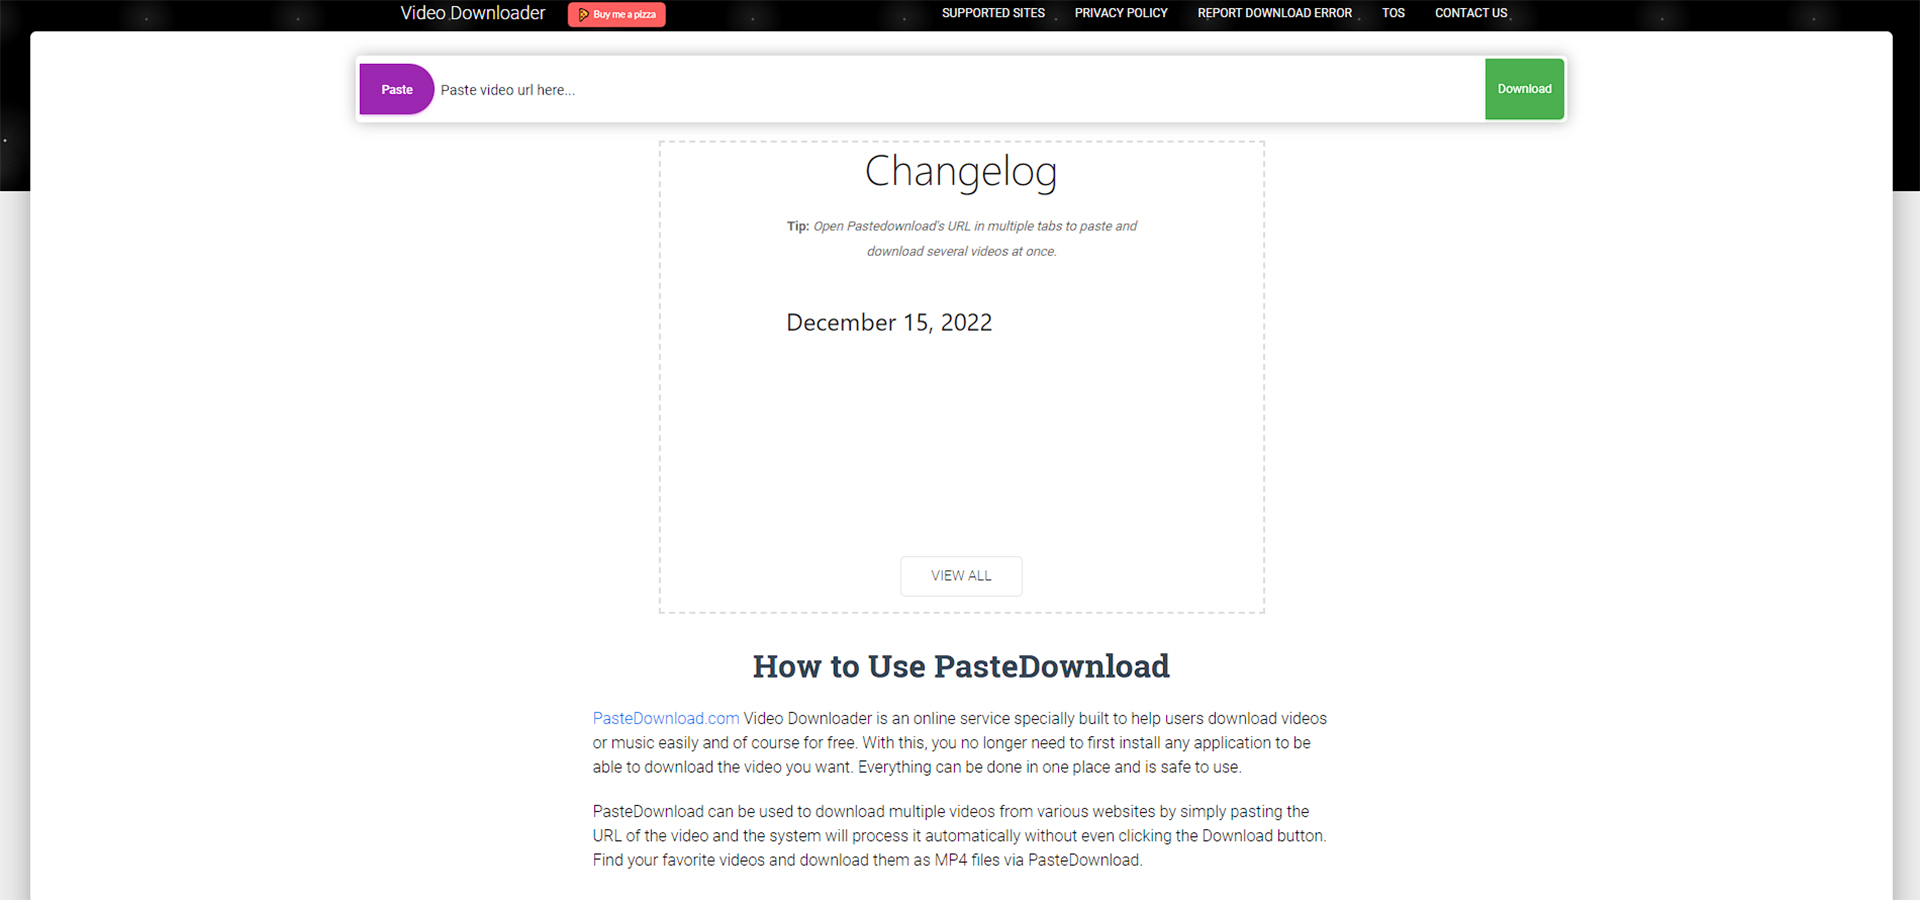 The first page of the video download site from Pinterest